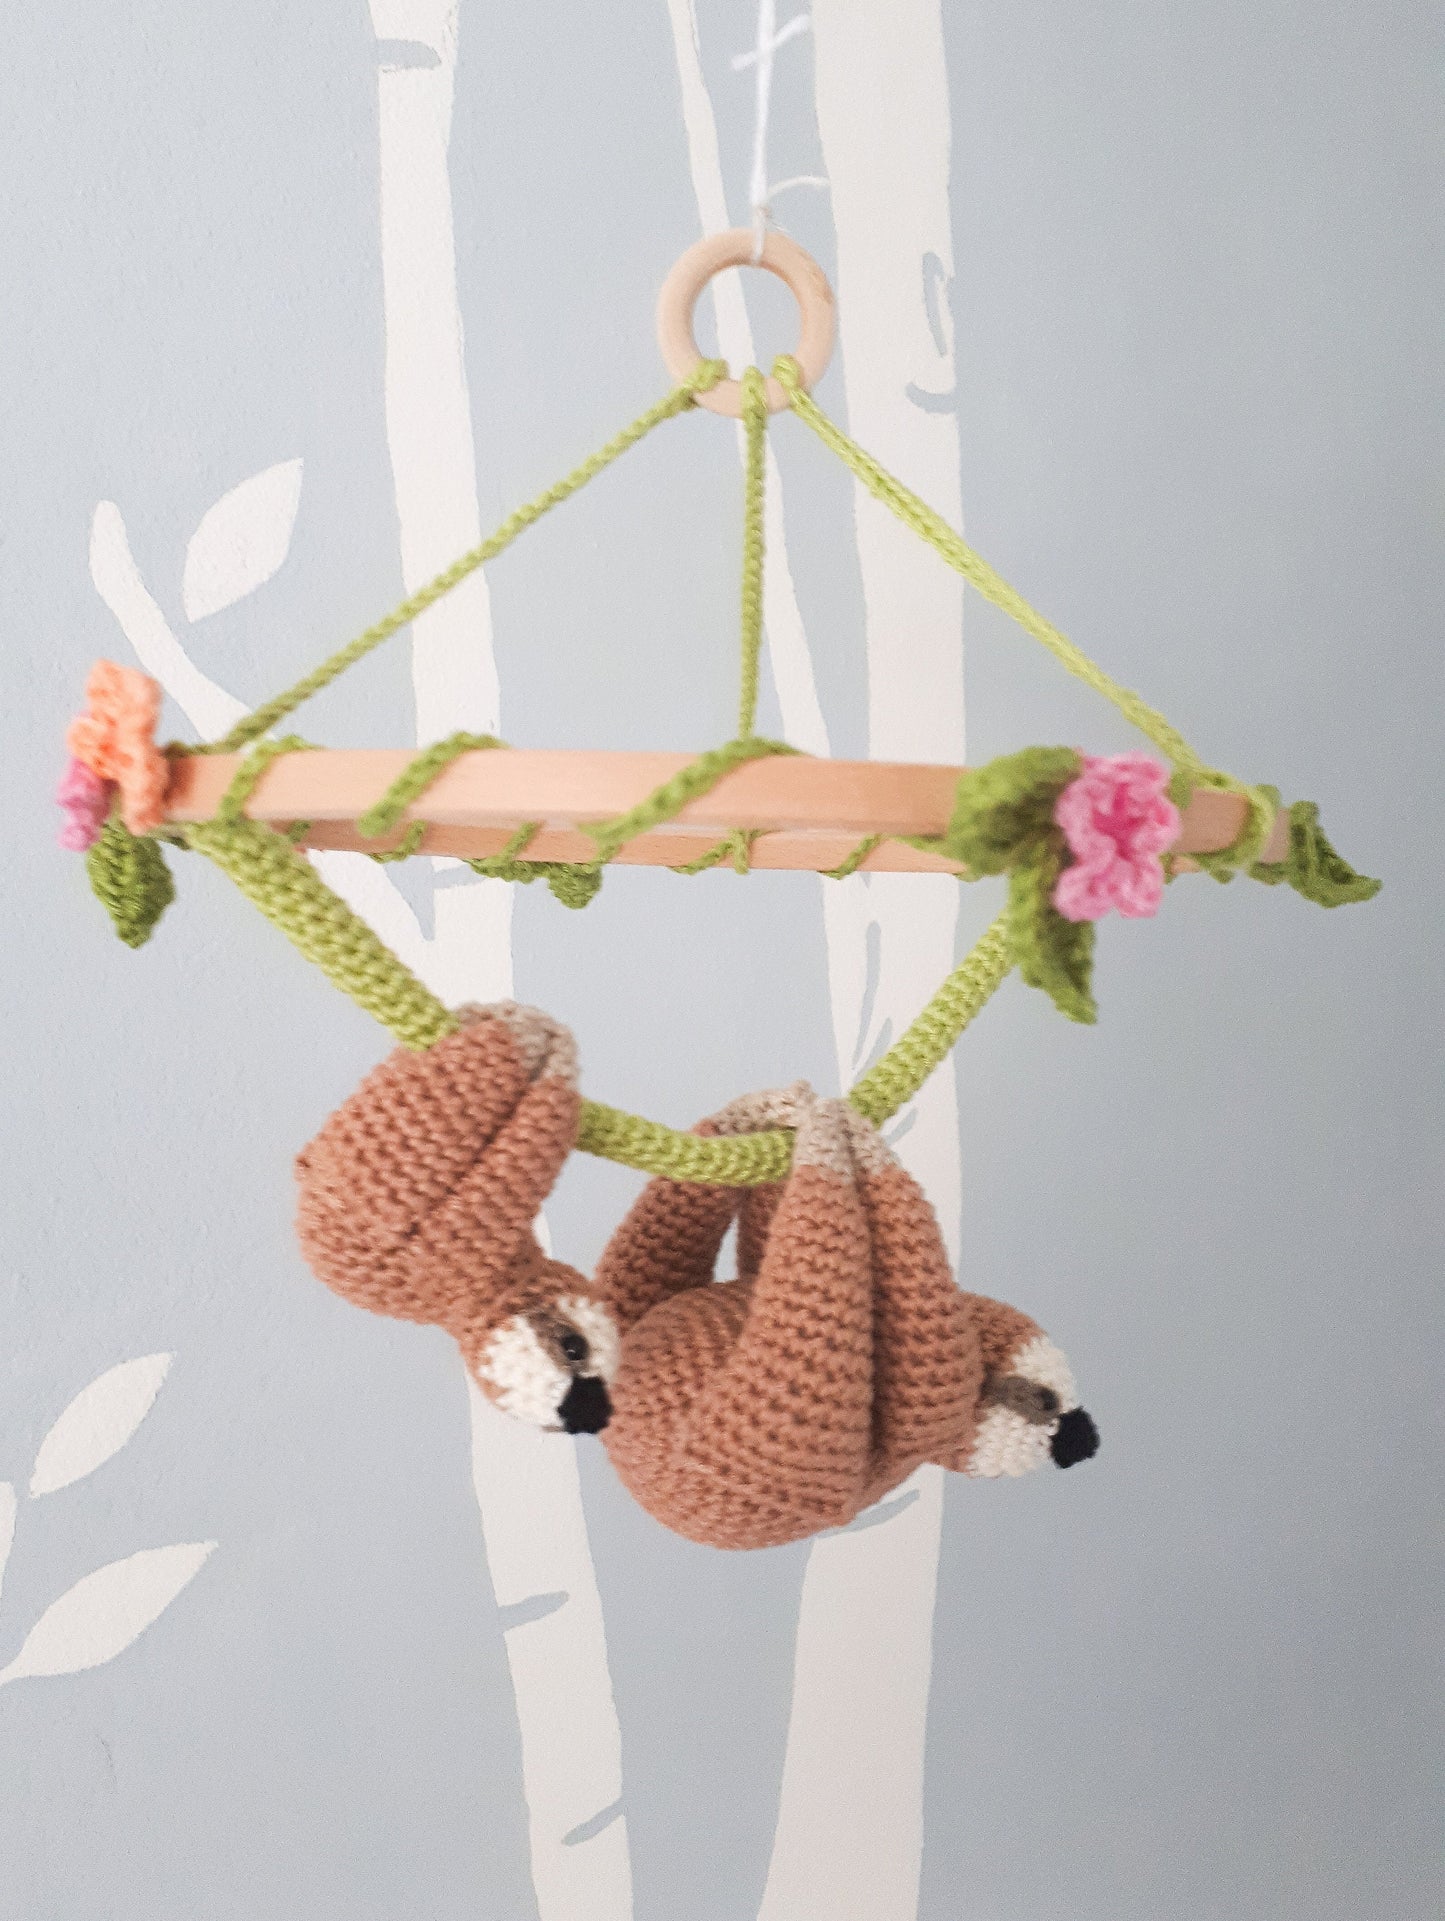 Sloth baby mobile with flowers, floral nursery decor